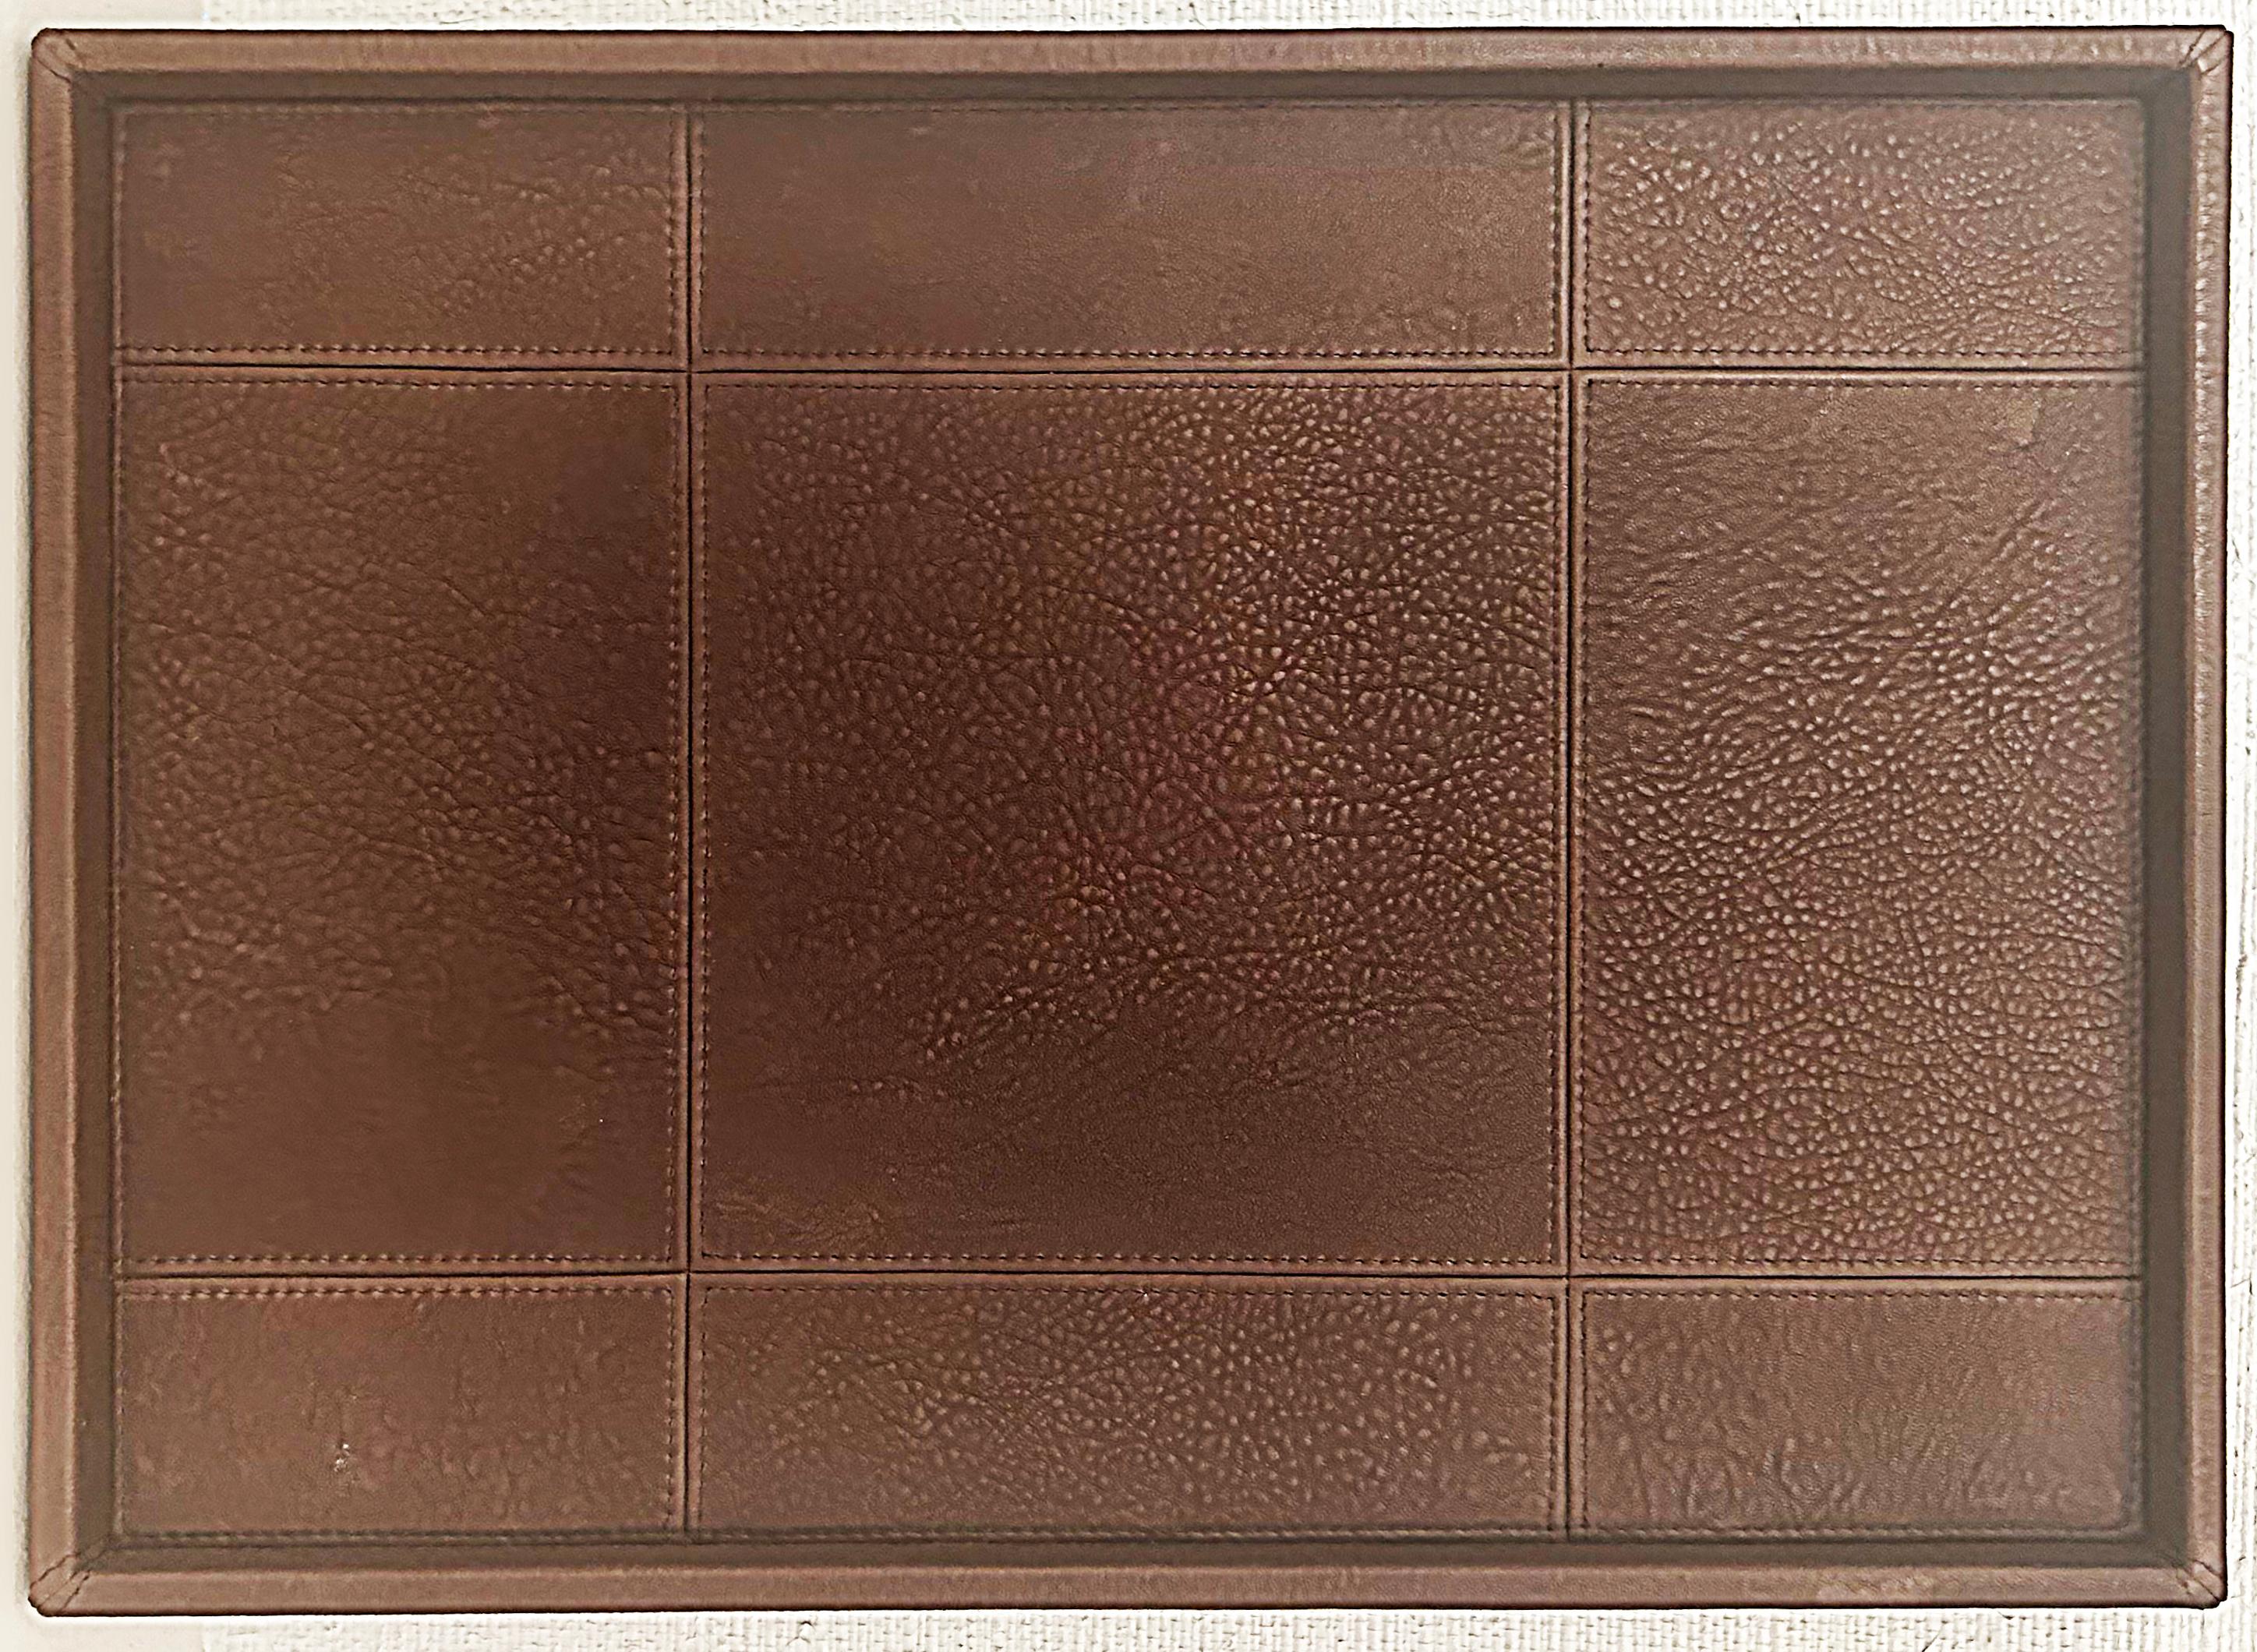 Contemporary Gilles Caffier Leather Clad Vanity Tray Made in France 2006